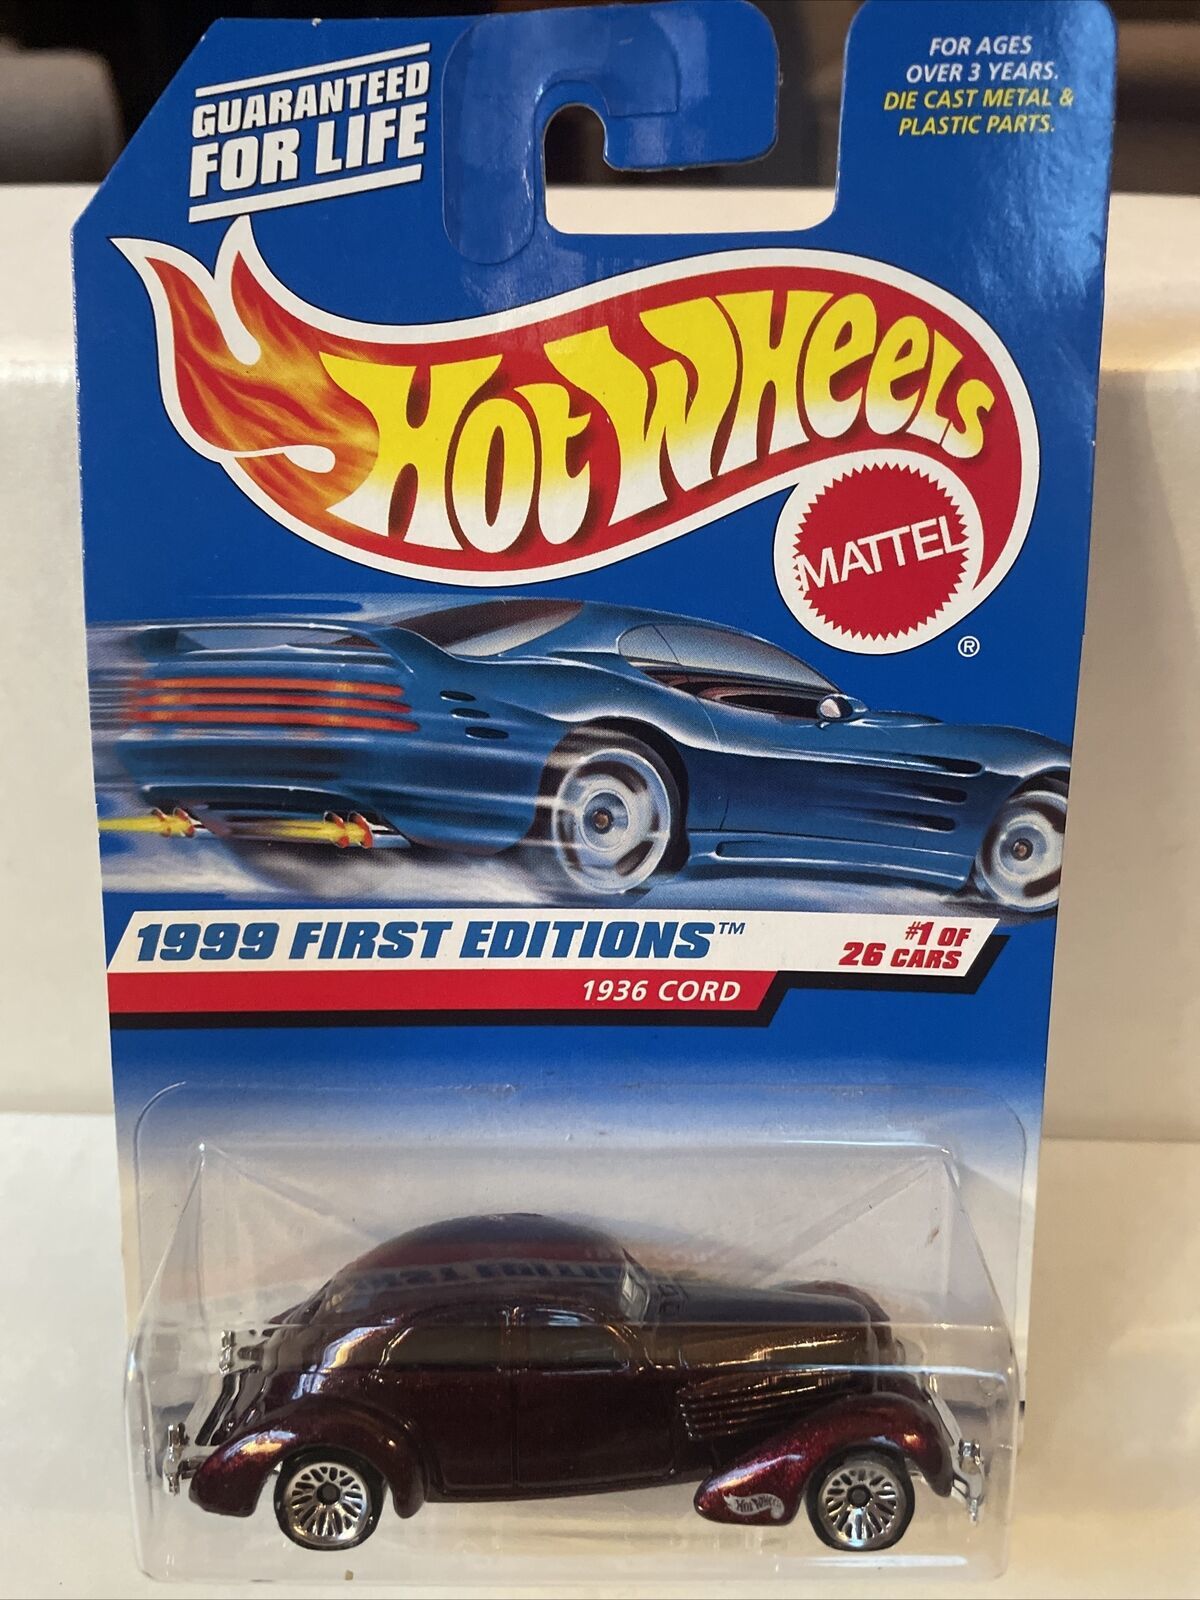 Primary image for 1999 Hot Wheels #649 First Editions 1/26 1936 CORD MF Red w/Chrome Lace Spokes